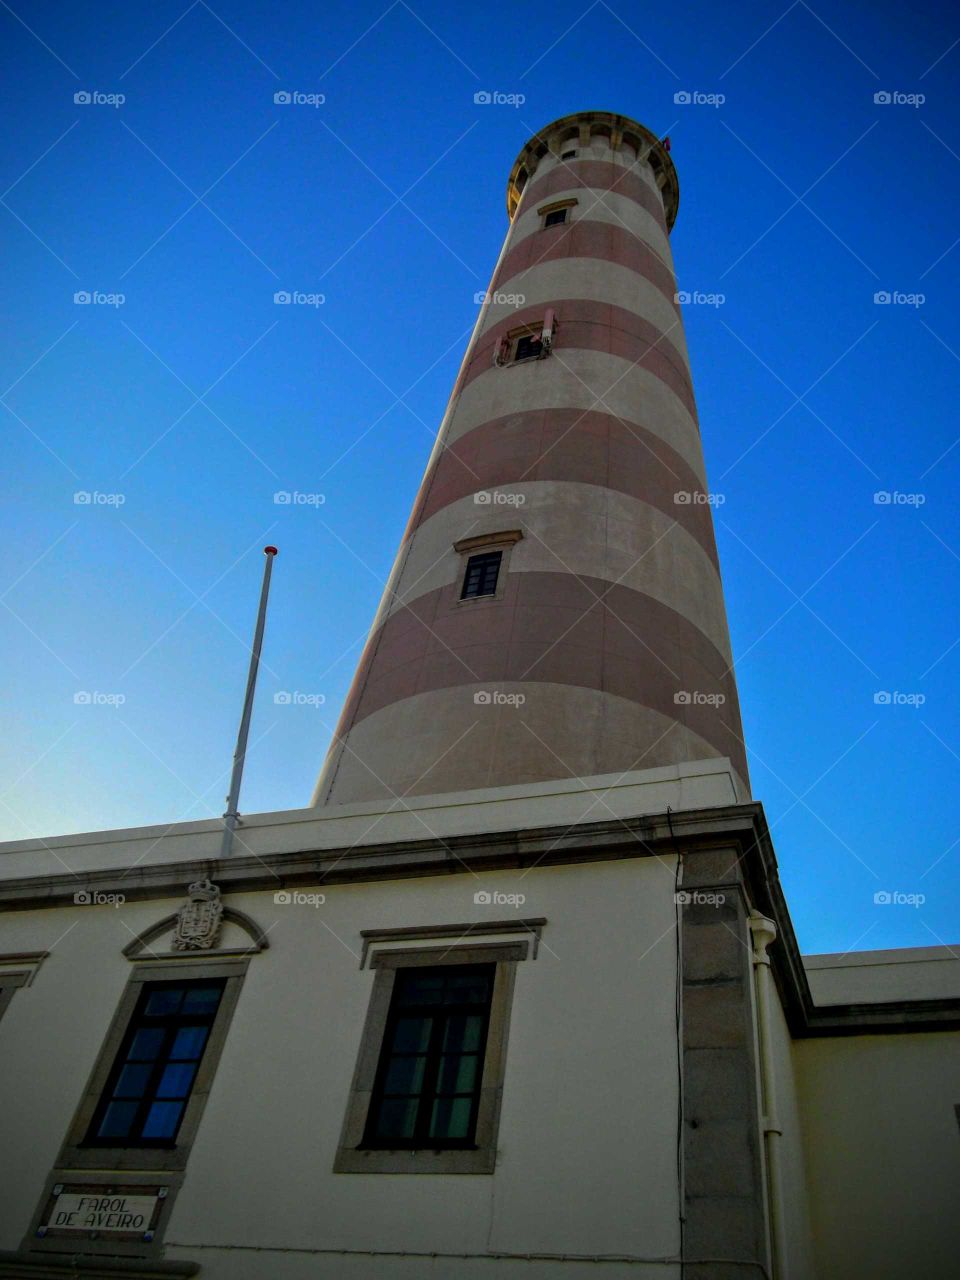 Farol de Aveiro. the largest functioning lighthouse in Europe